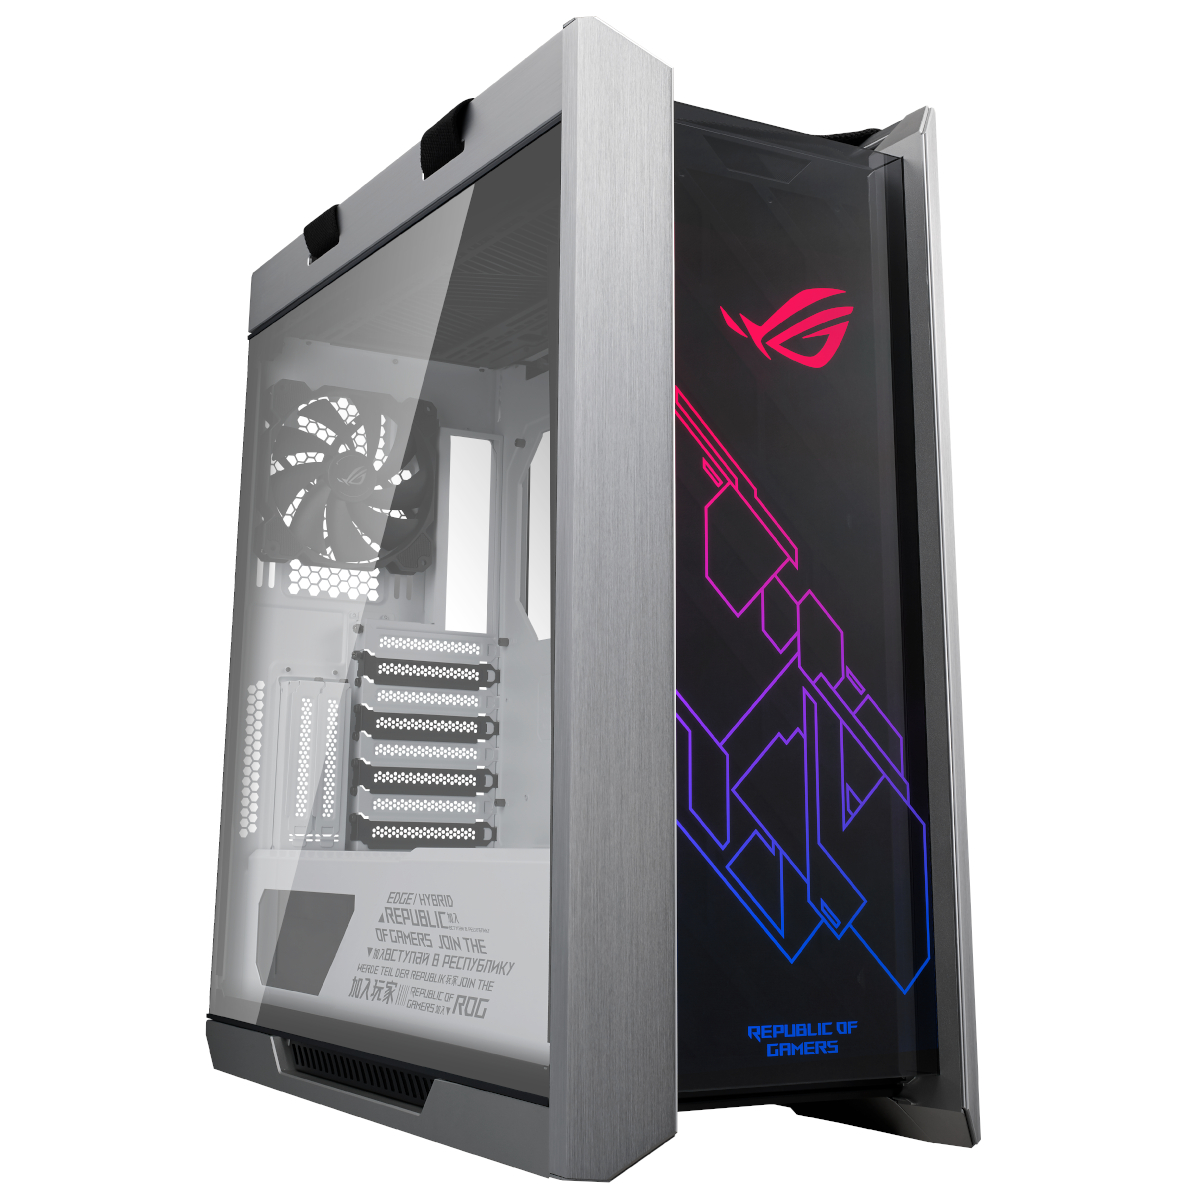 ASUS Republic of Gamers - Get you a case that can handle the most